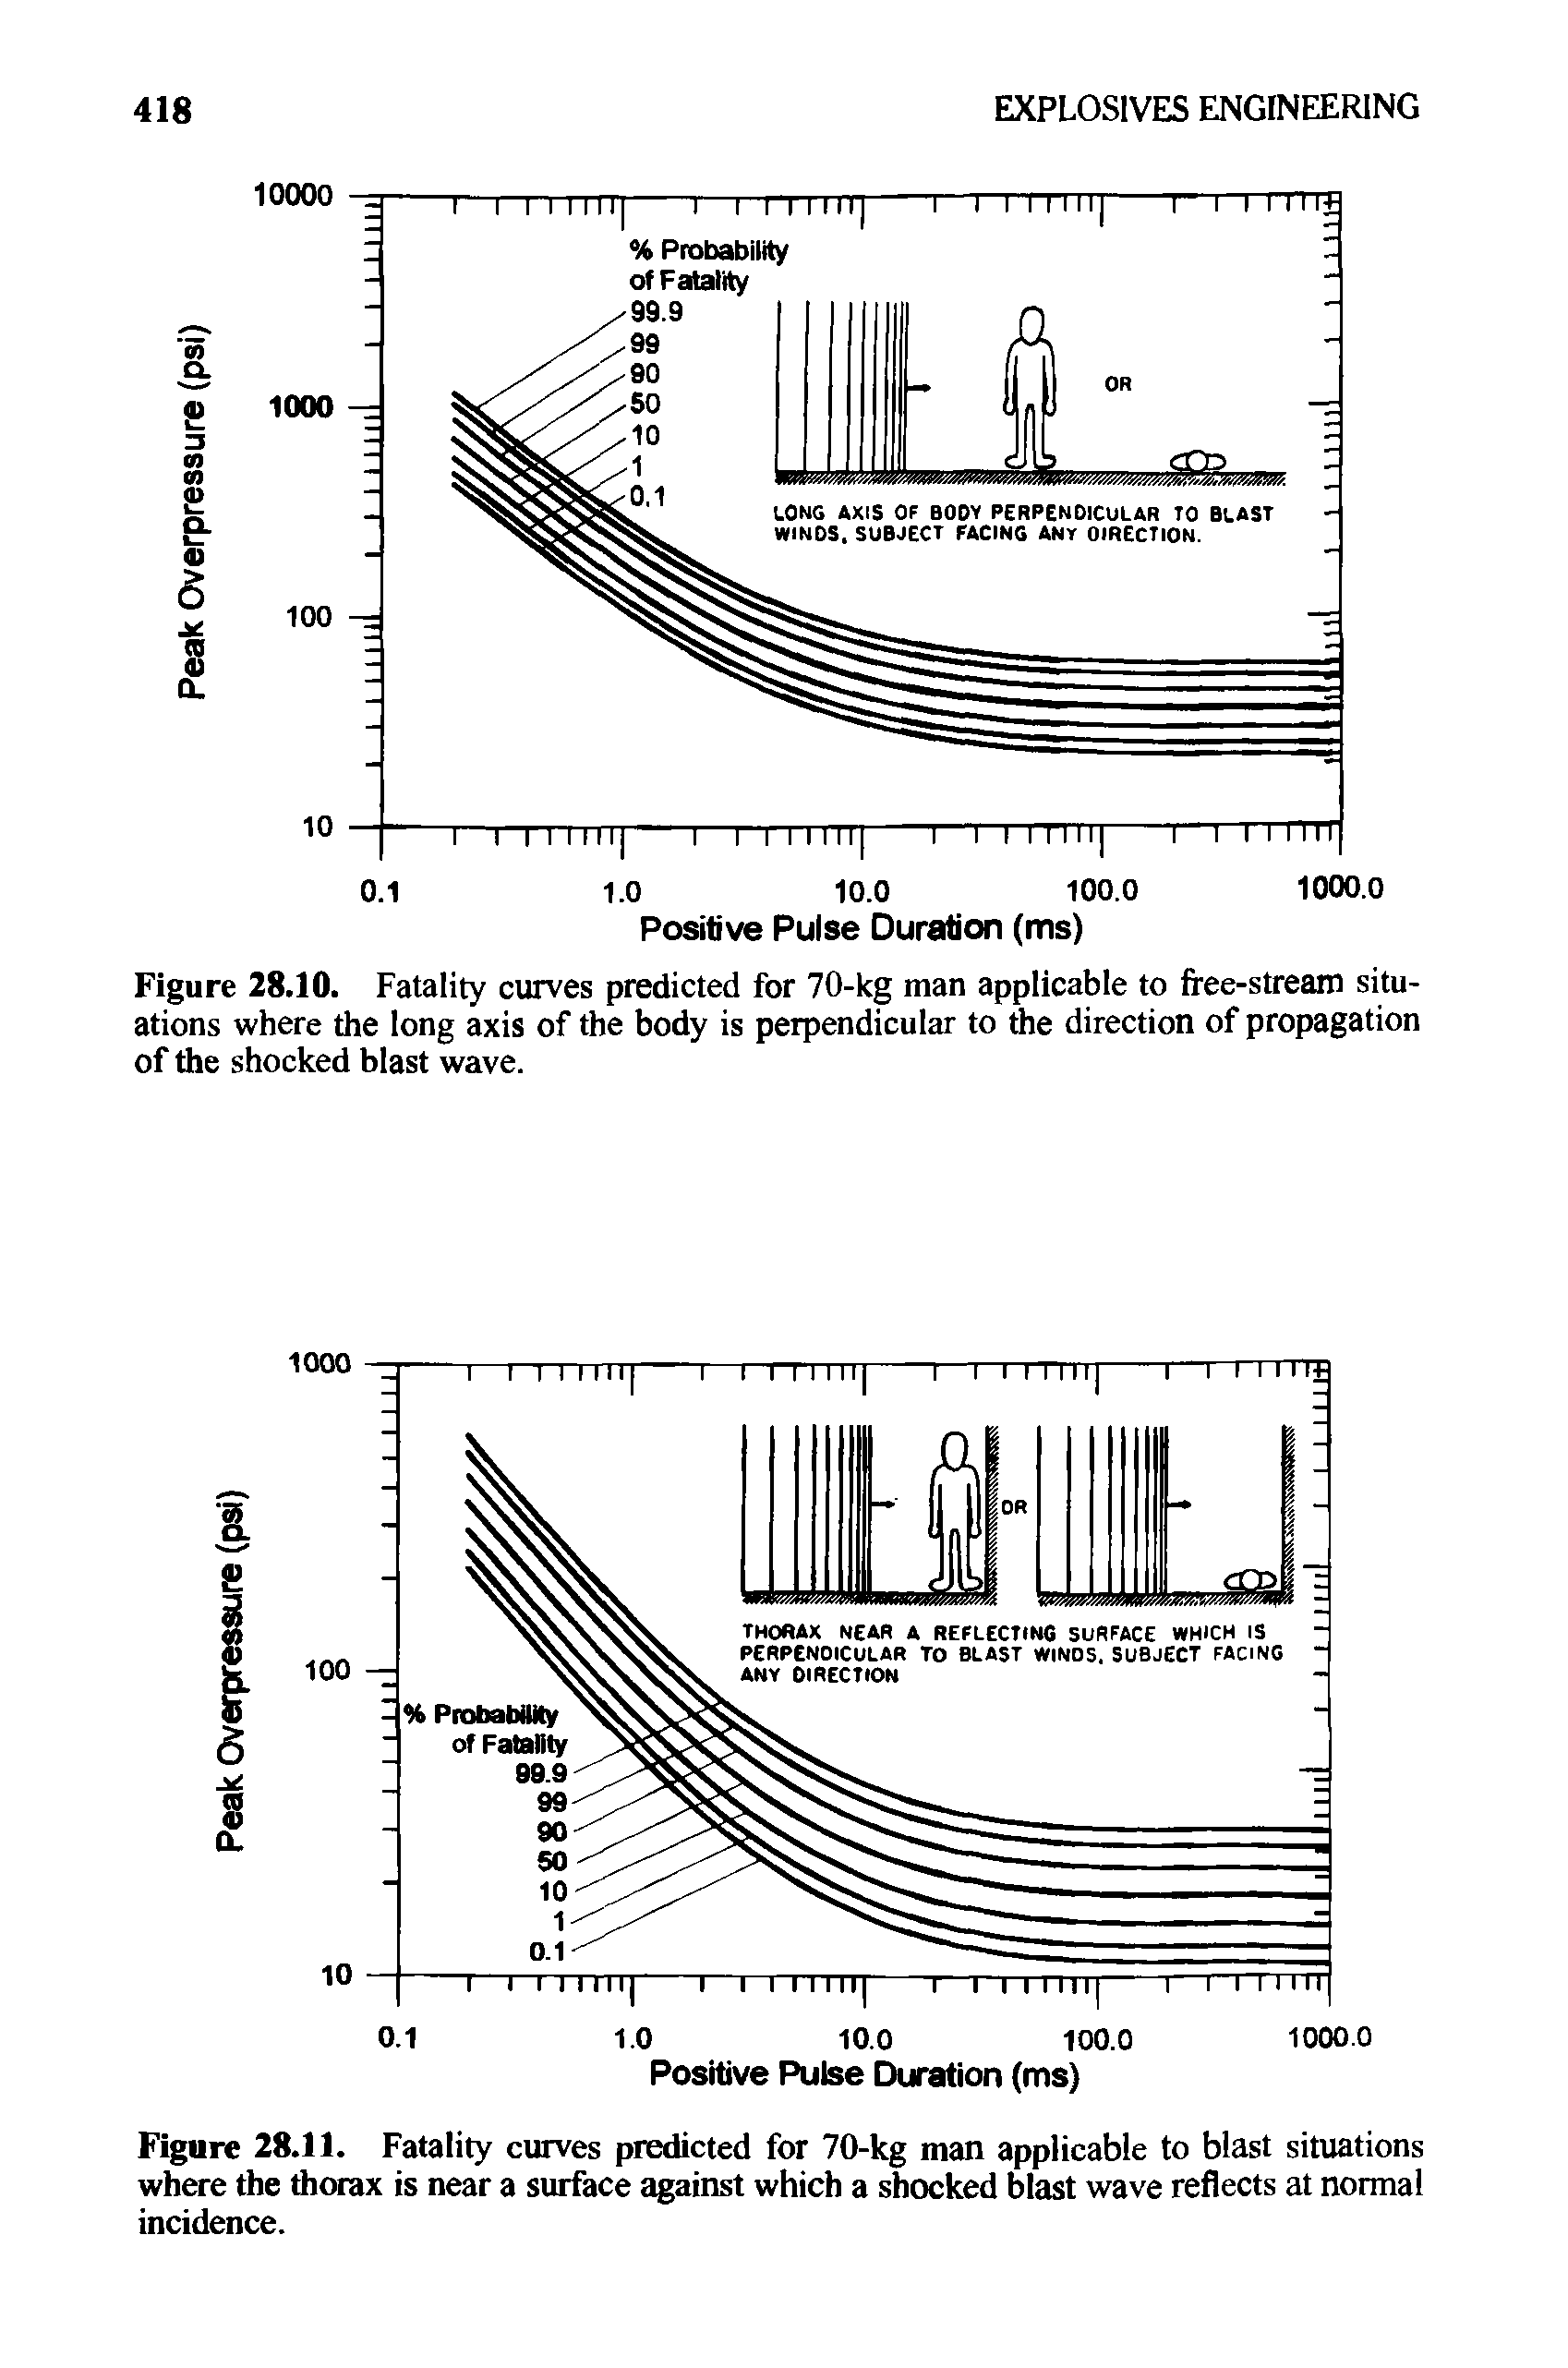 Figure 28.11. Fatality curves predicted for 70-kg man applicable to blast situations where the thorax is near a surface against which a shocked blast wave reflects at normal incidence.